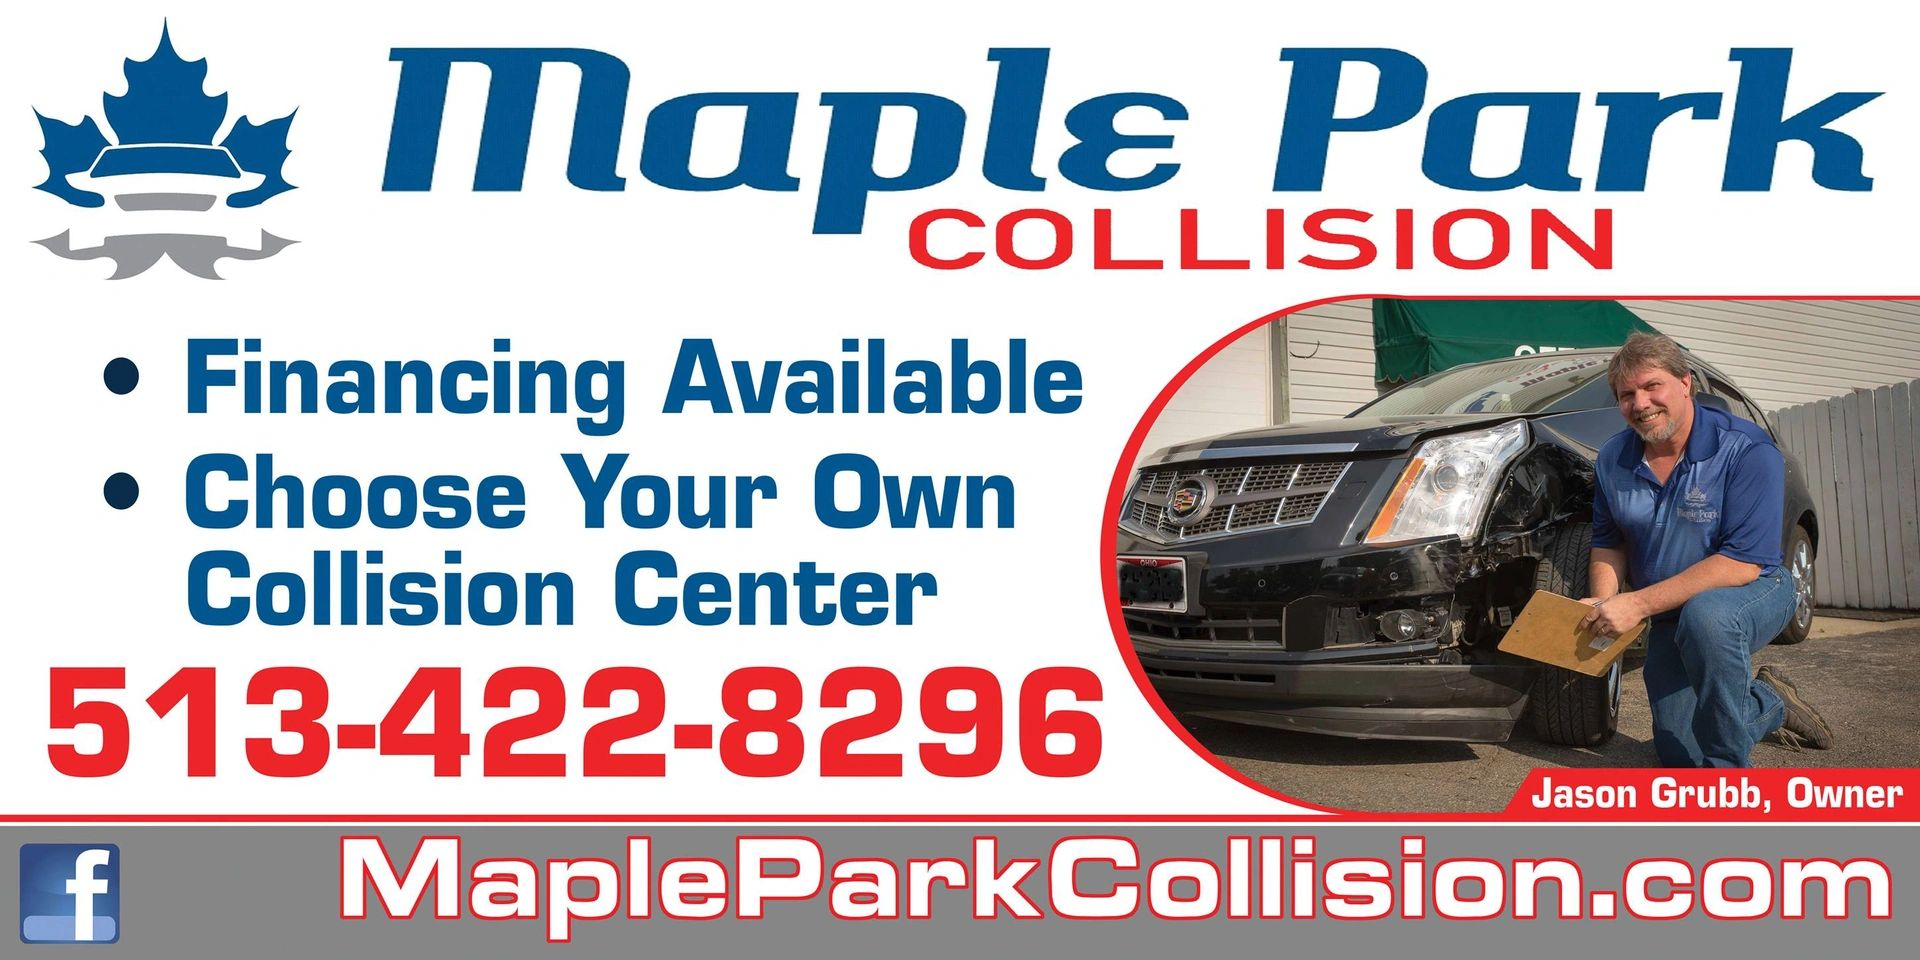 Maple Park Collision is an ASE Certified Body Shop in Middletown, Ohio. 